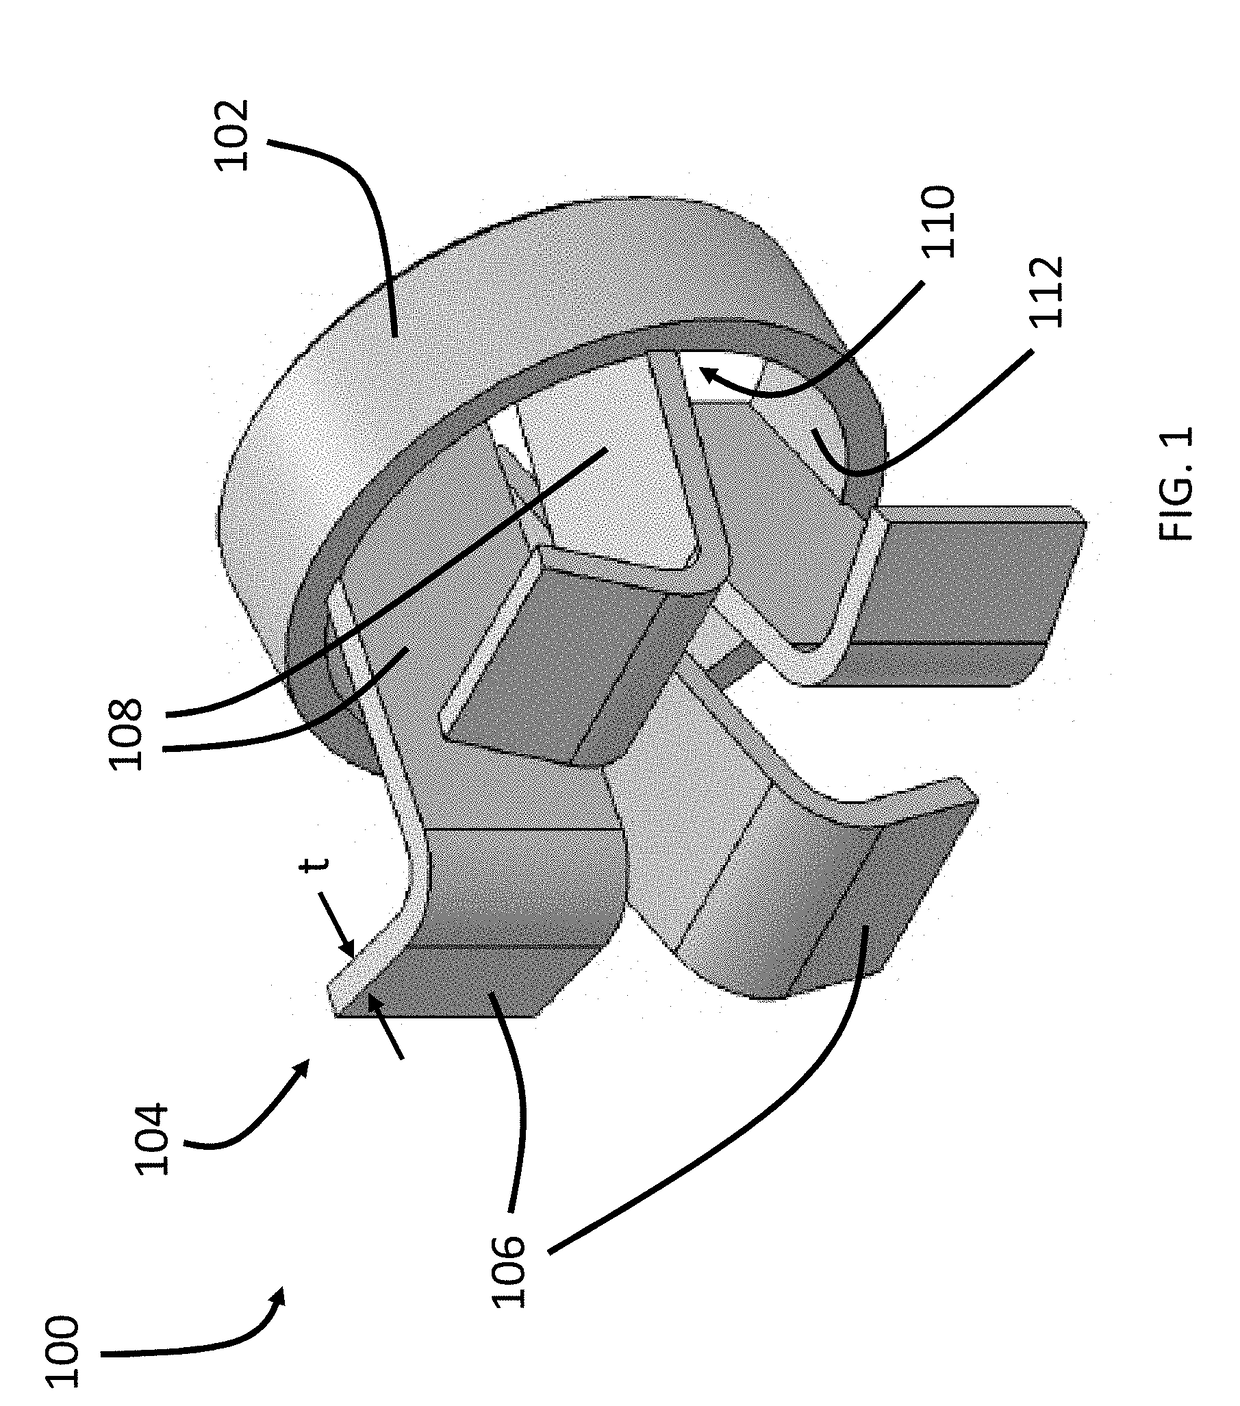 Baffle assembly for modifying transitional flow effects between different cavities